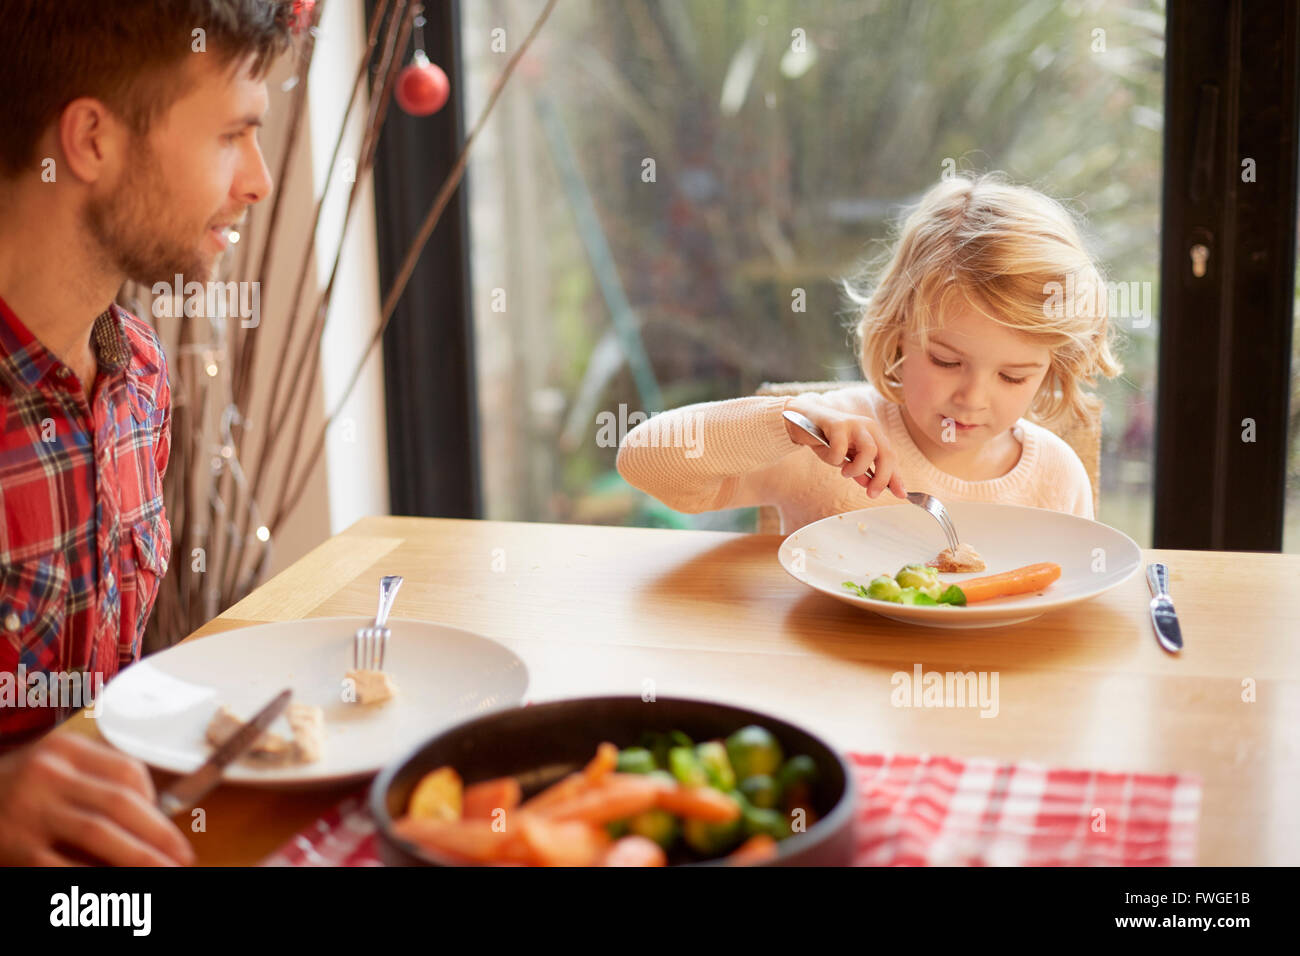 A child and a man sitting at a table eating a cooked meal. Stock Photo